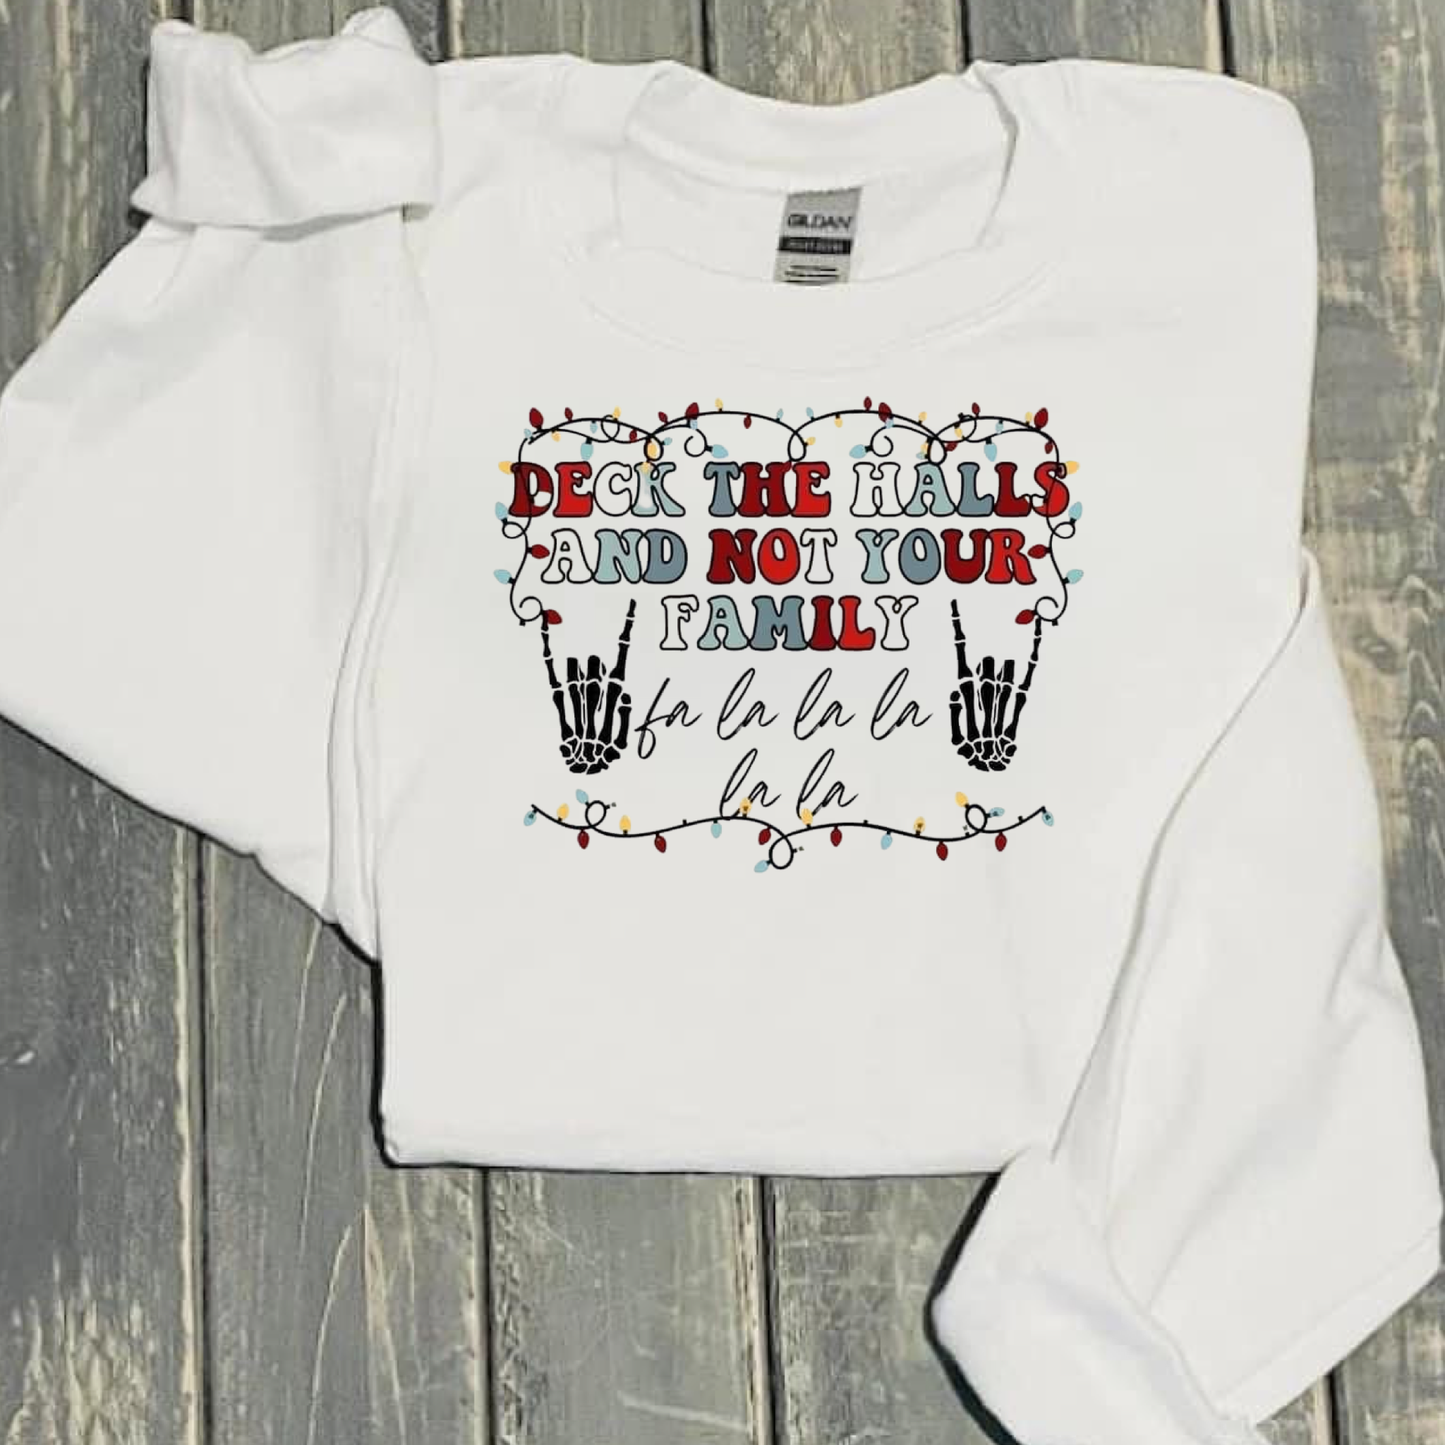 Deck the halls and not your family crewneck sweater